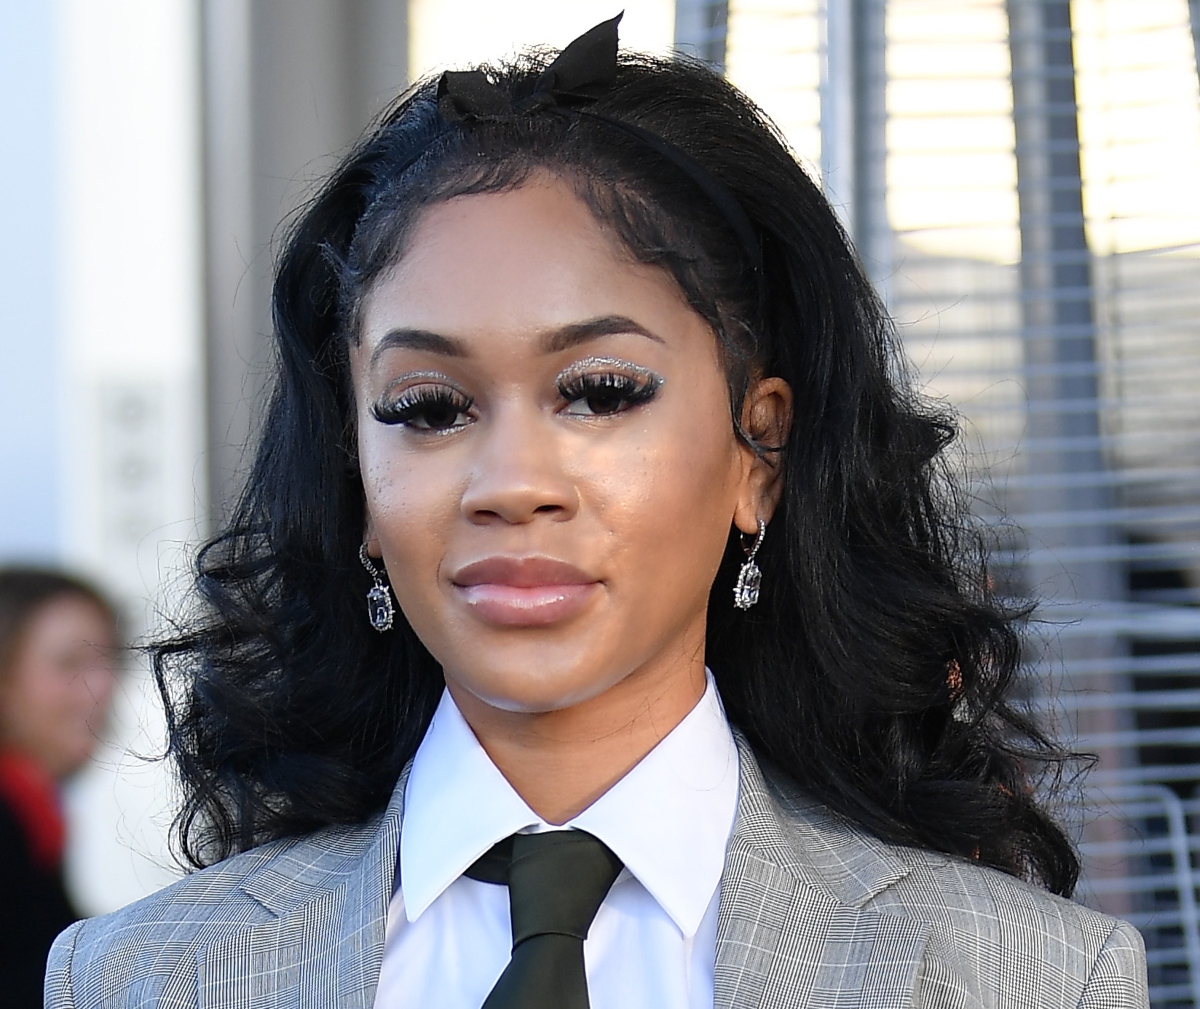 Saweetie Reveals She Almost Went to Jail When She Was Younger